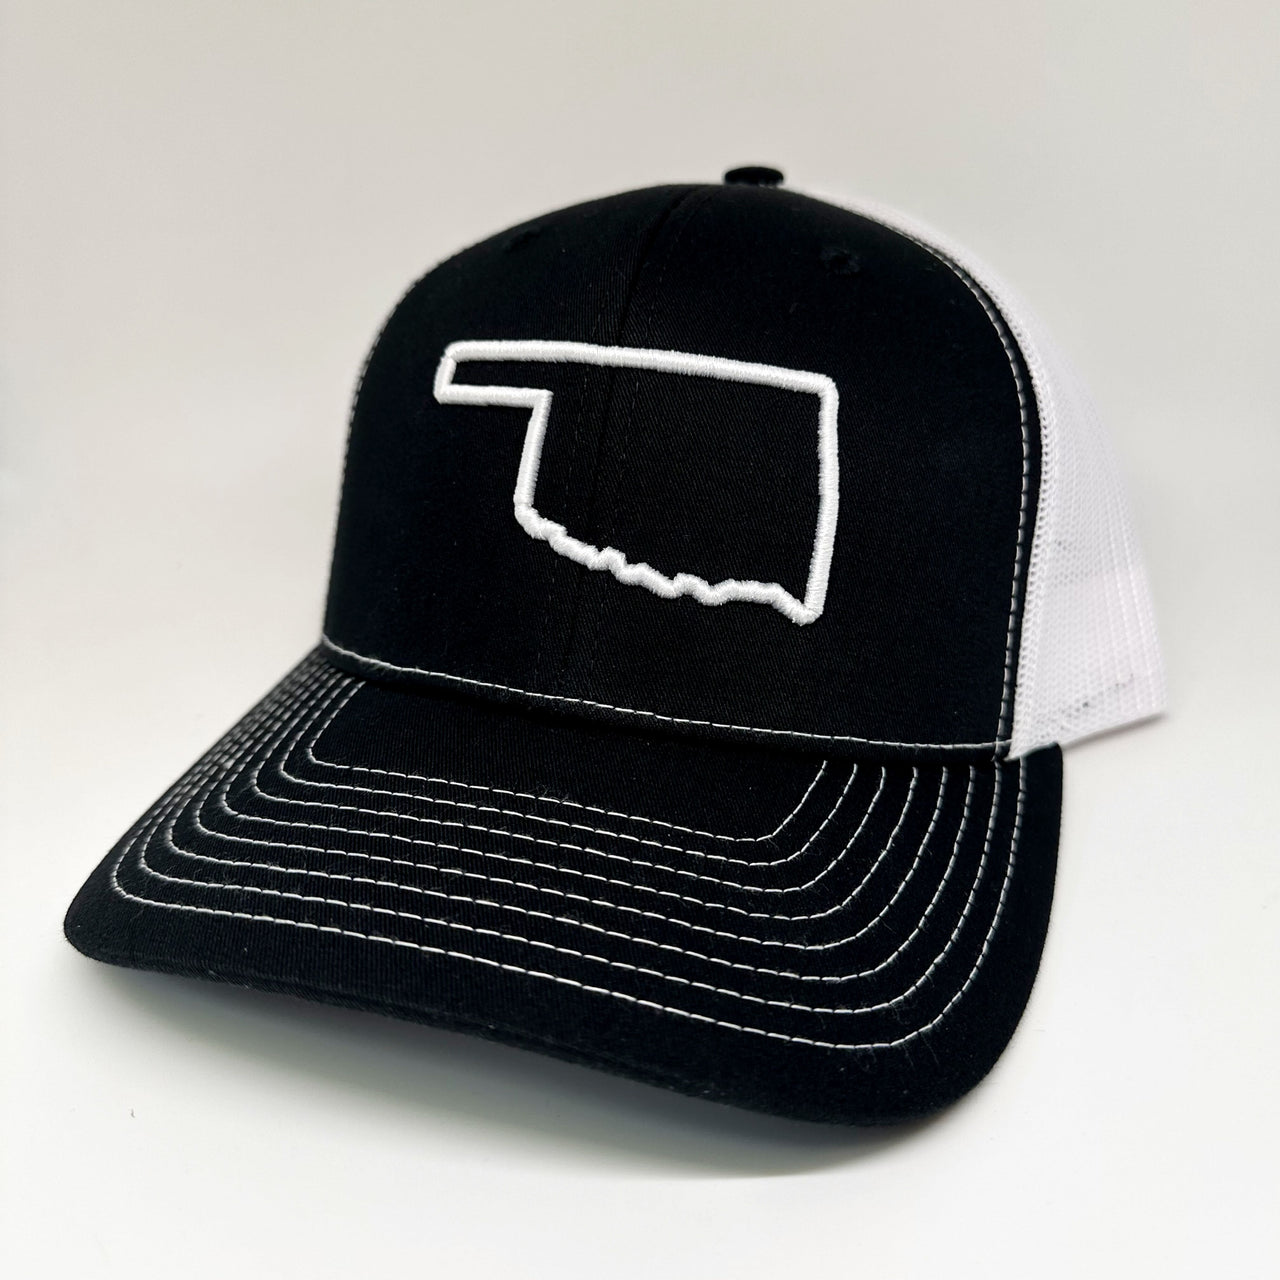 Oklahoma Embroidery Hat - Greater Half